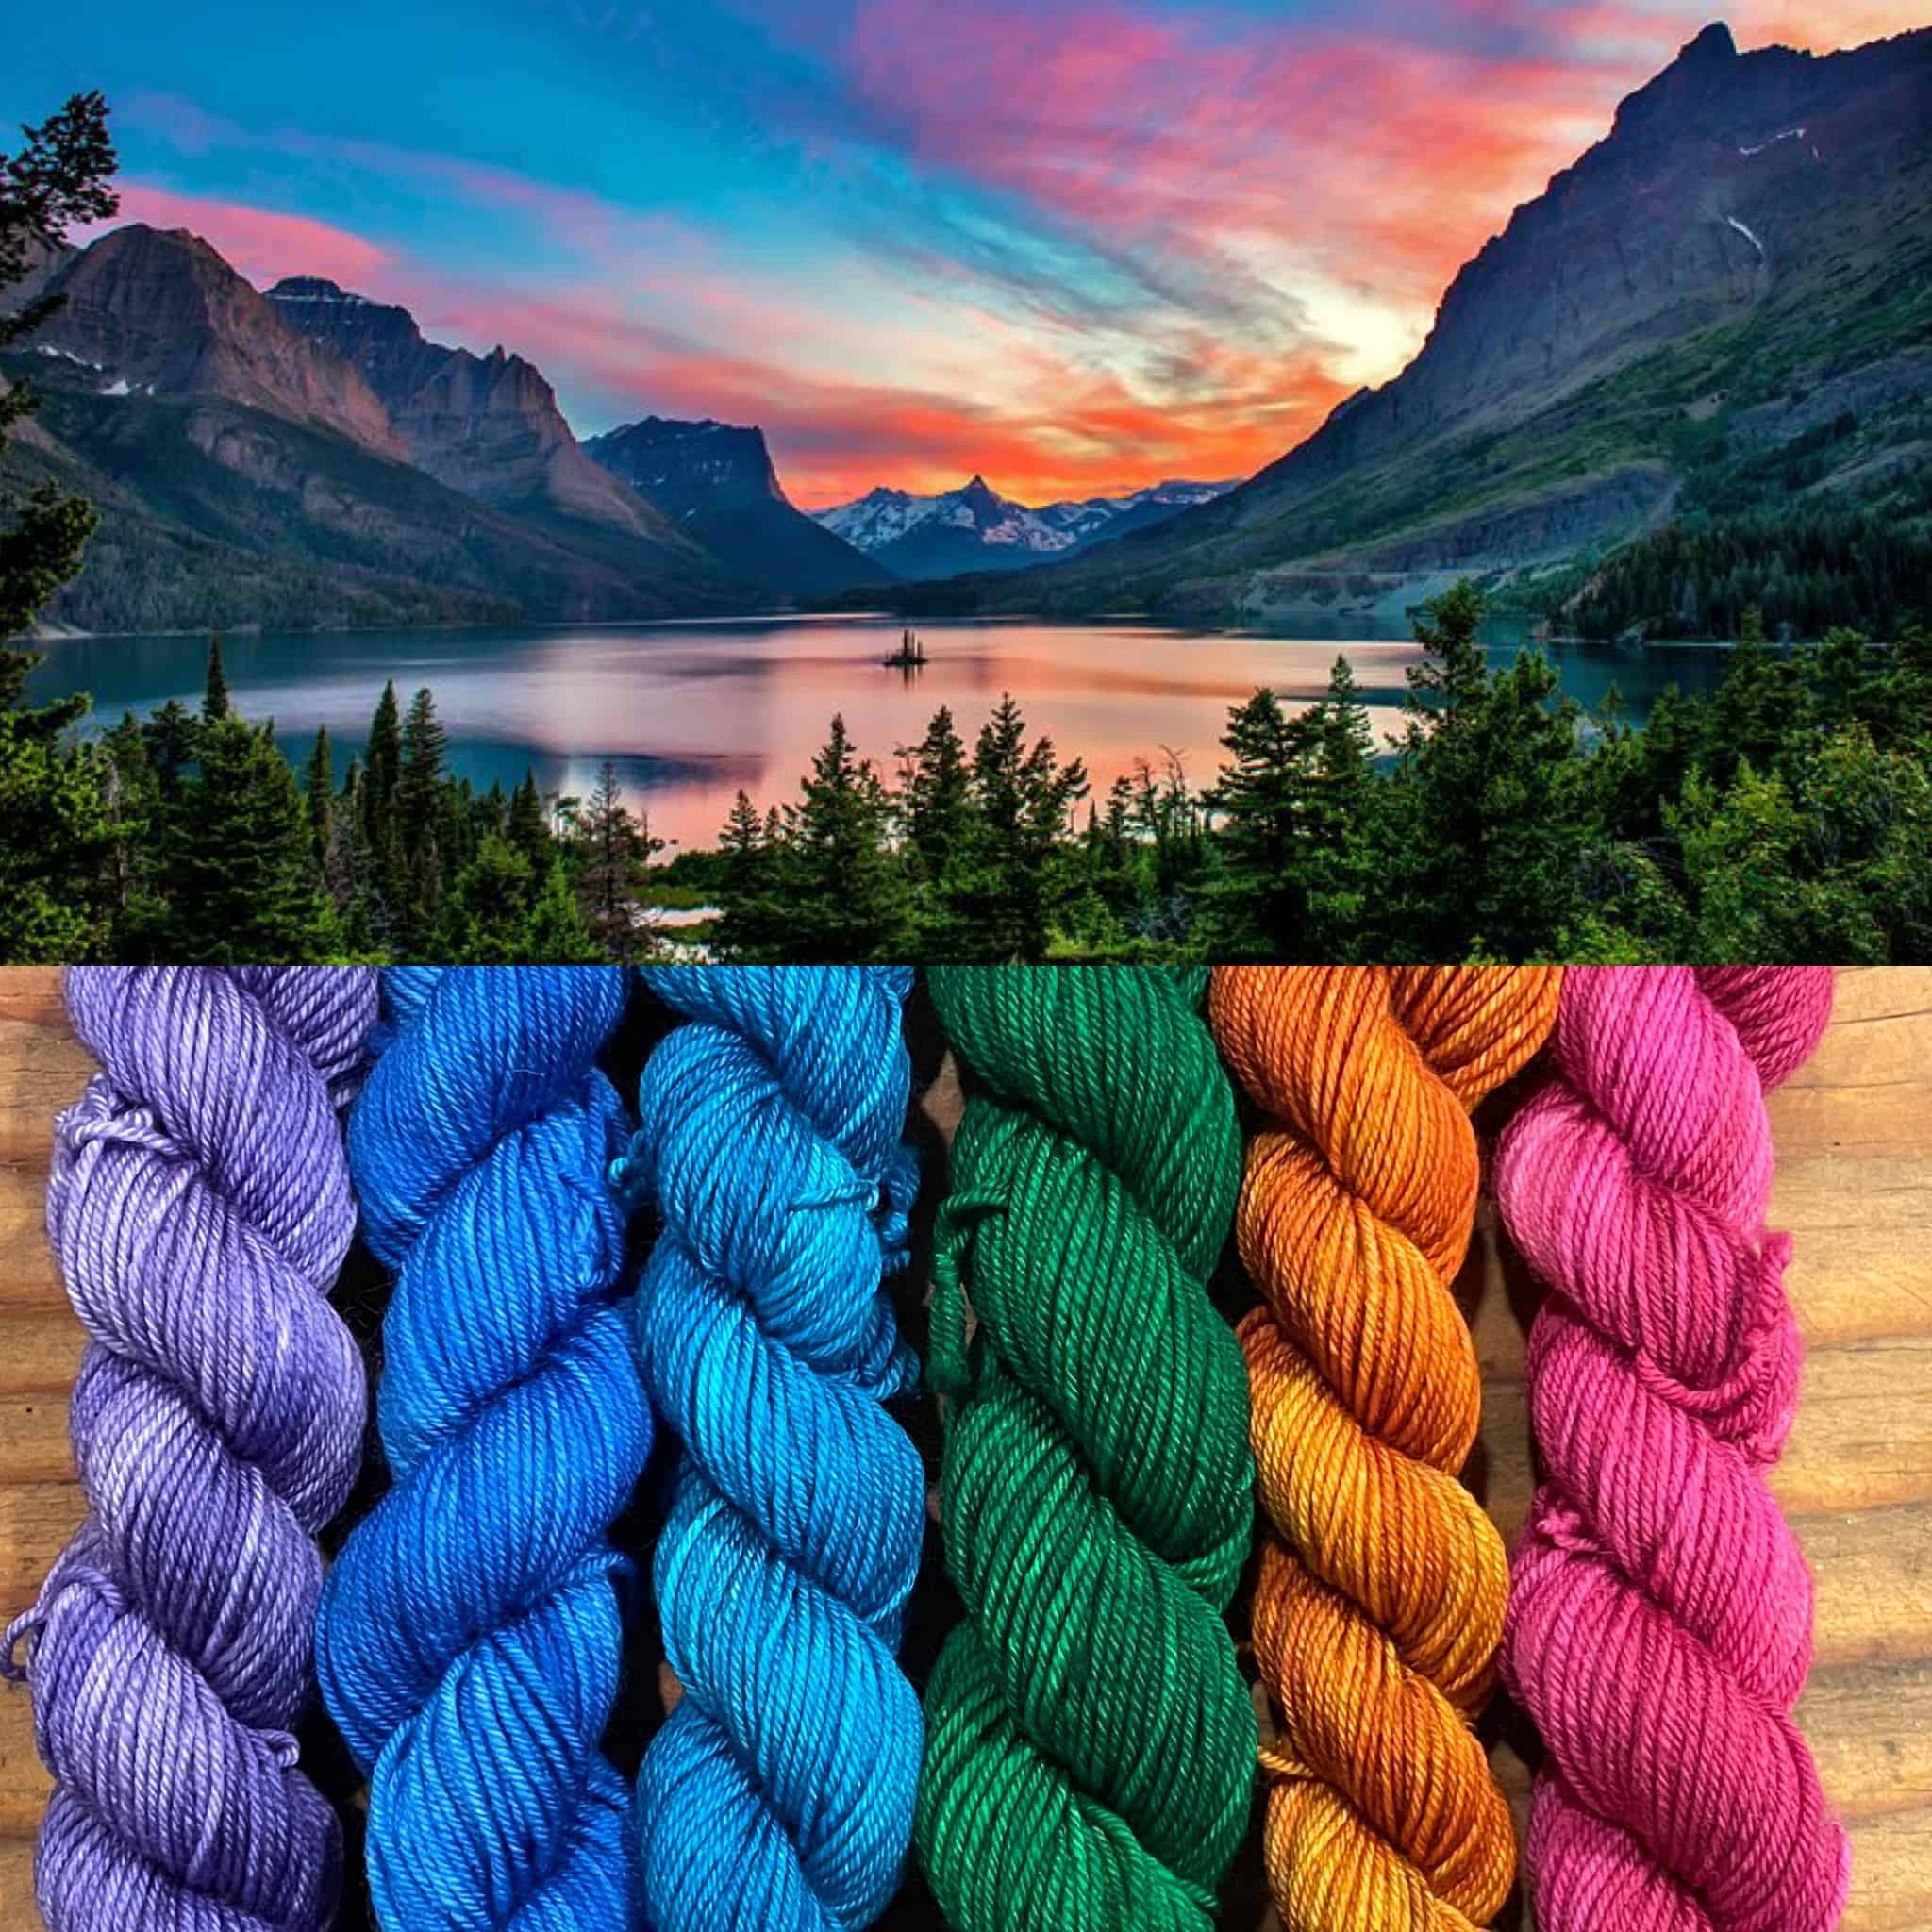 A lake and mountains and purple, blue, green, orange and pink yarn.